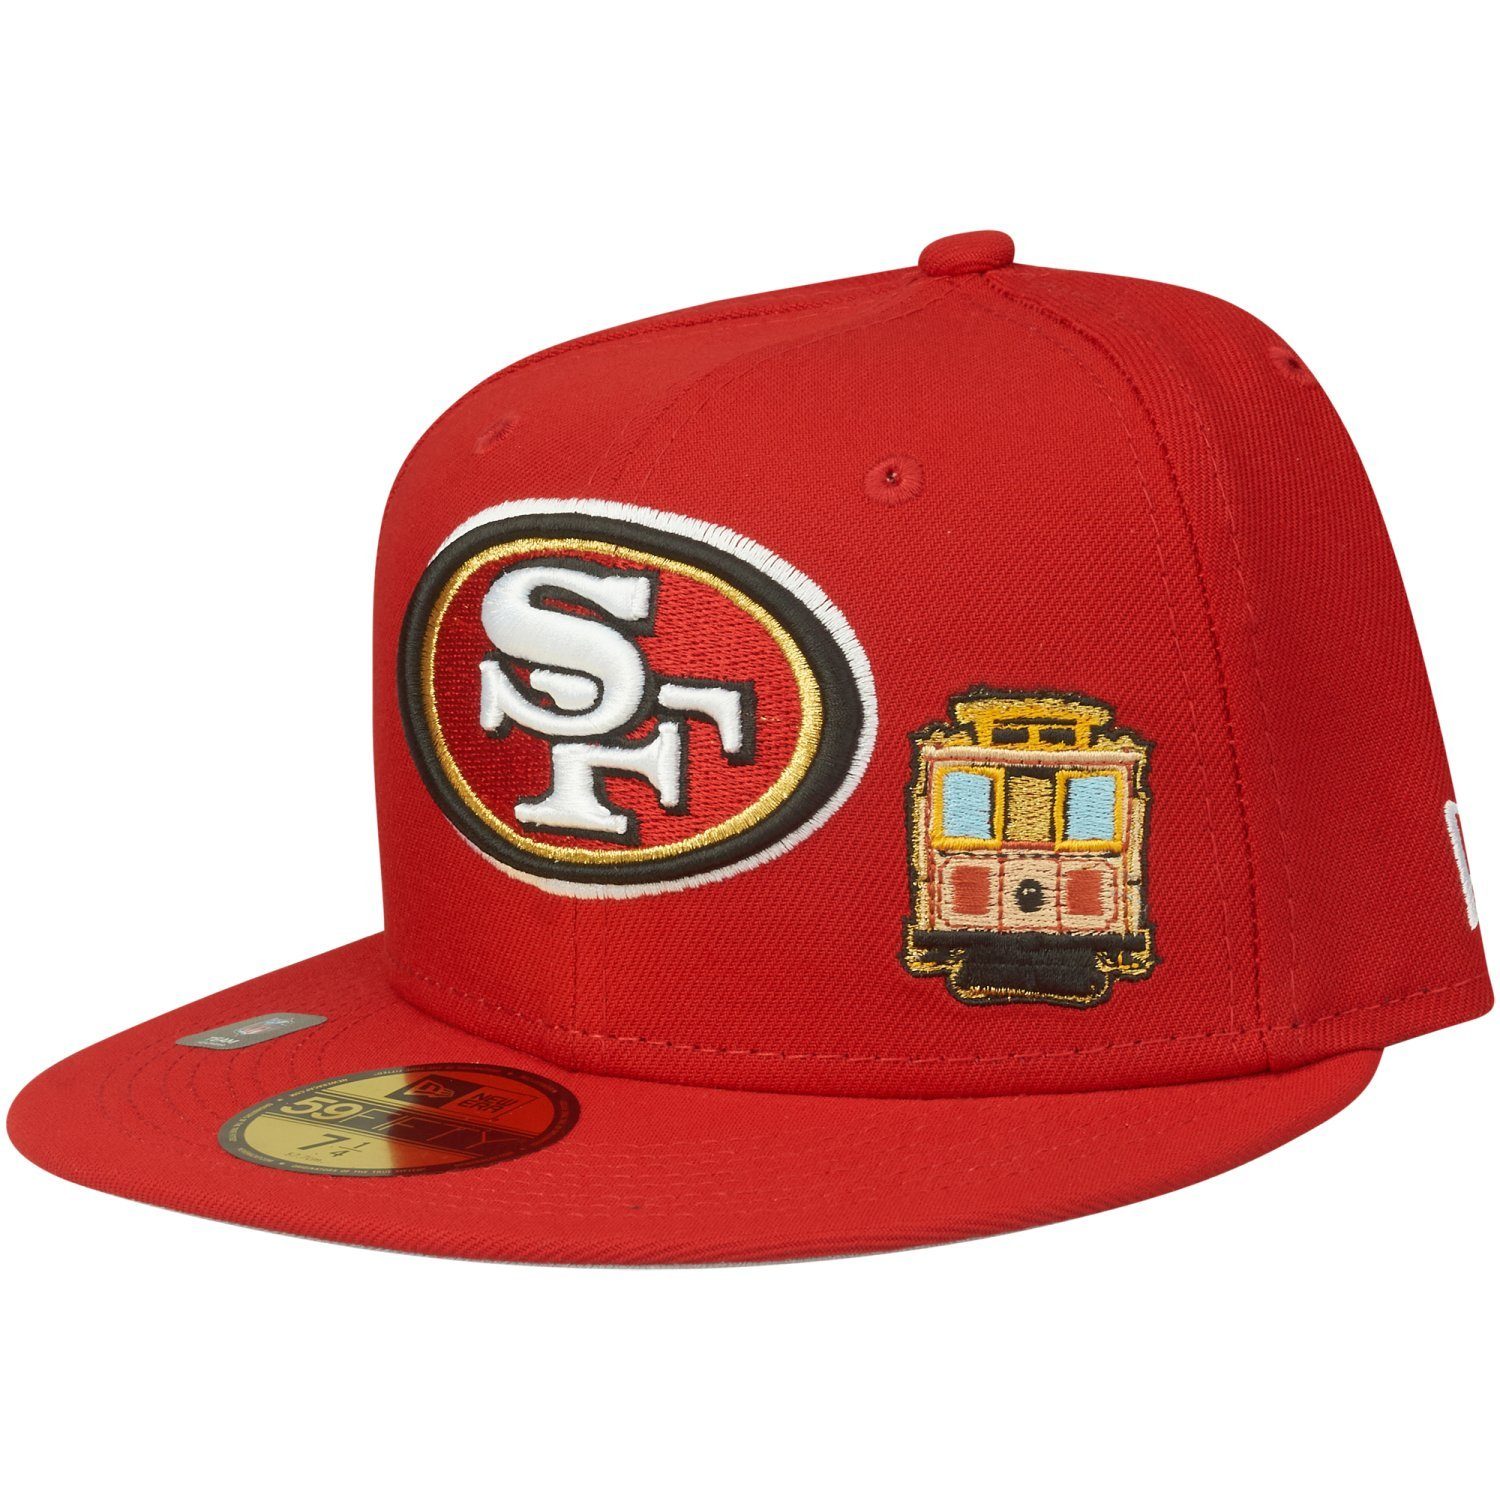 New Era Fitted Cap 59Fifty NFL CITY San Francisco 49ers, NFL San Francisco  49ers Fitted, Mütze, Kappe, Herren, gerade